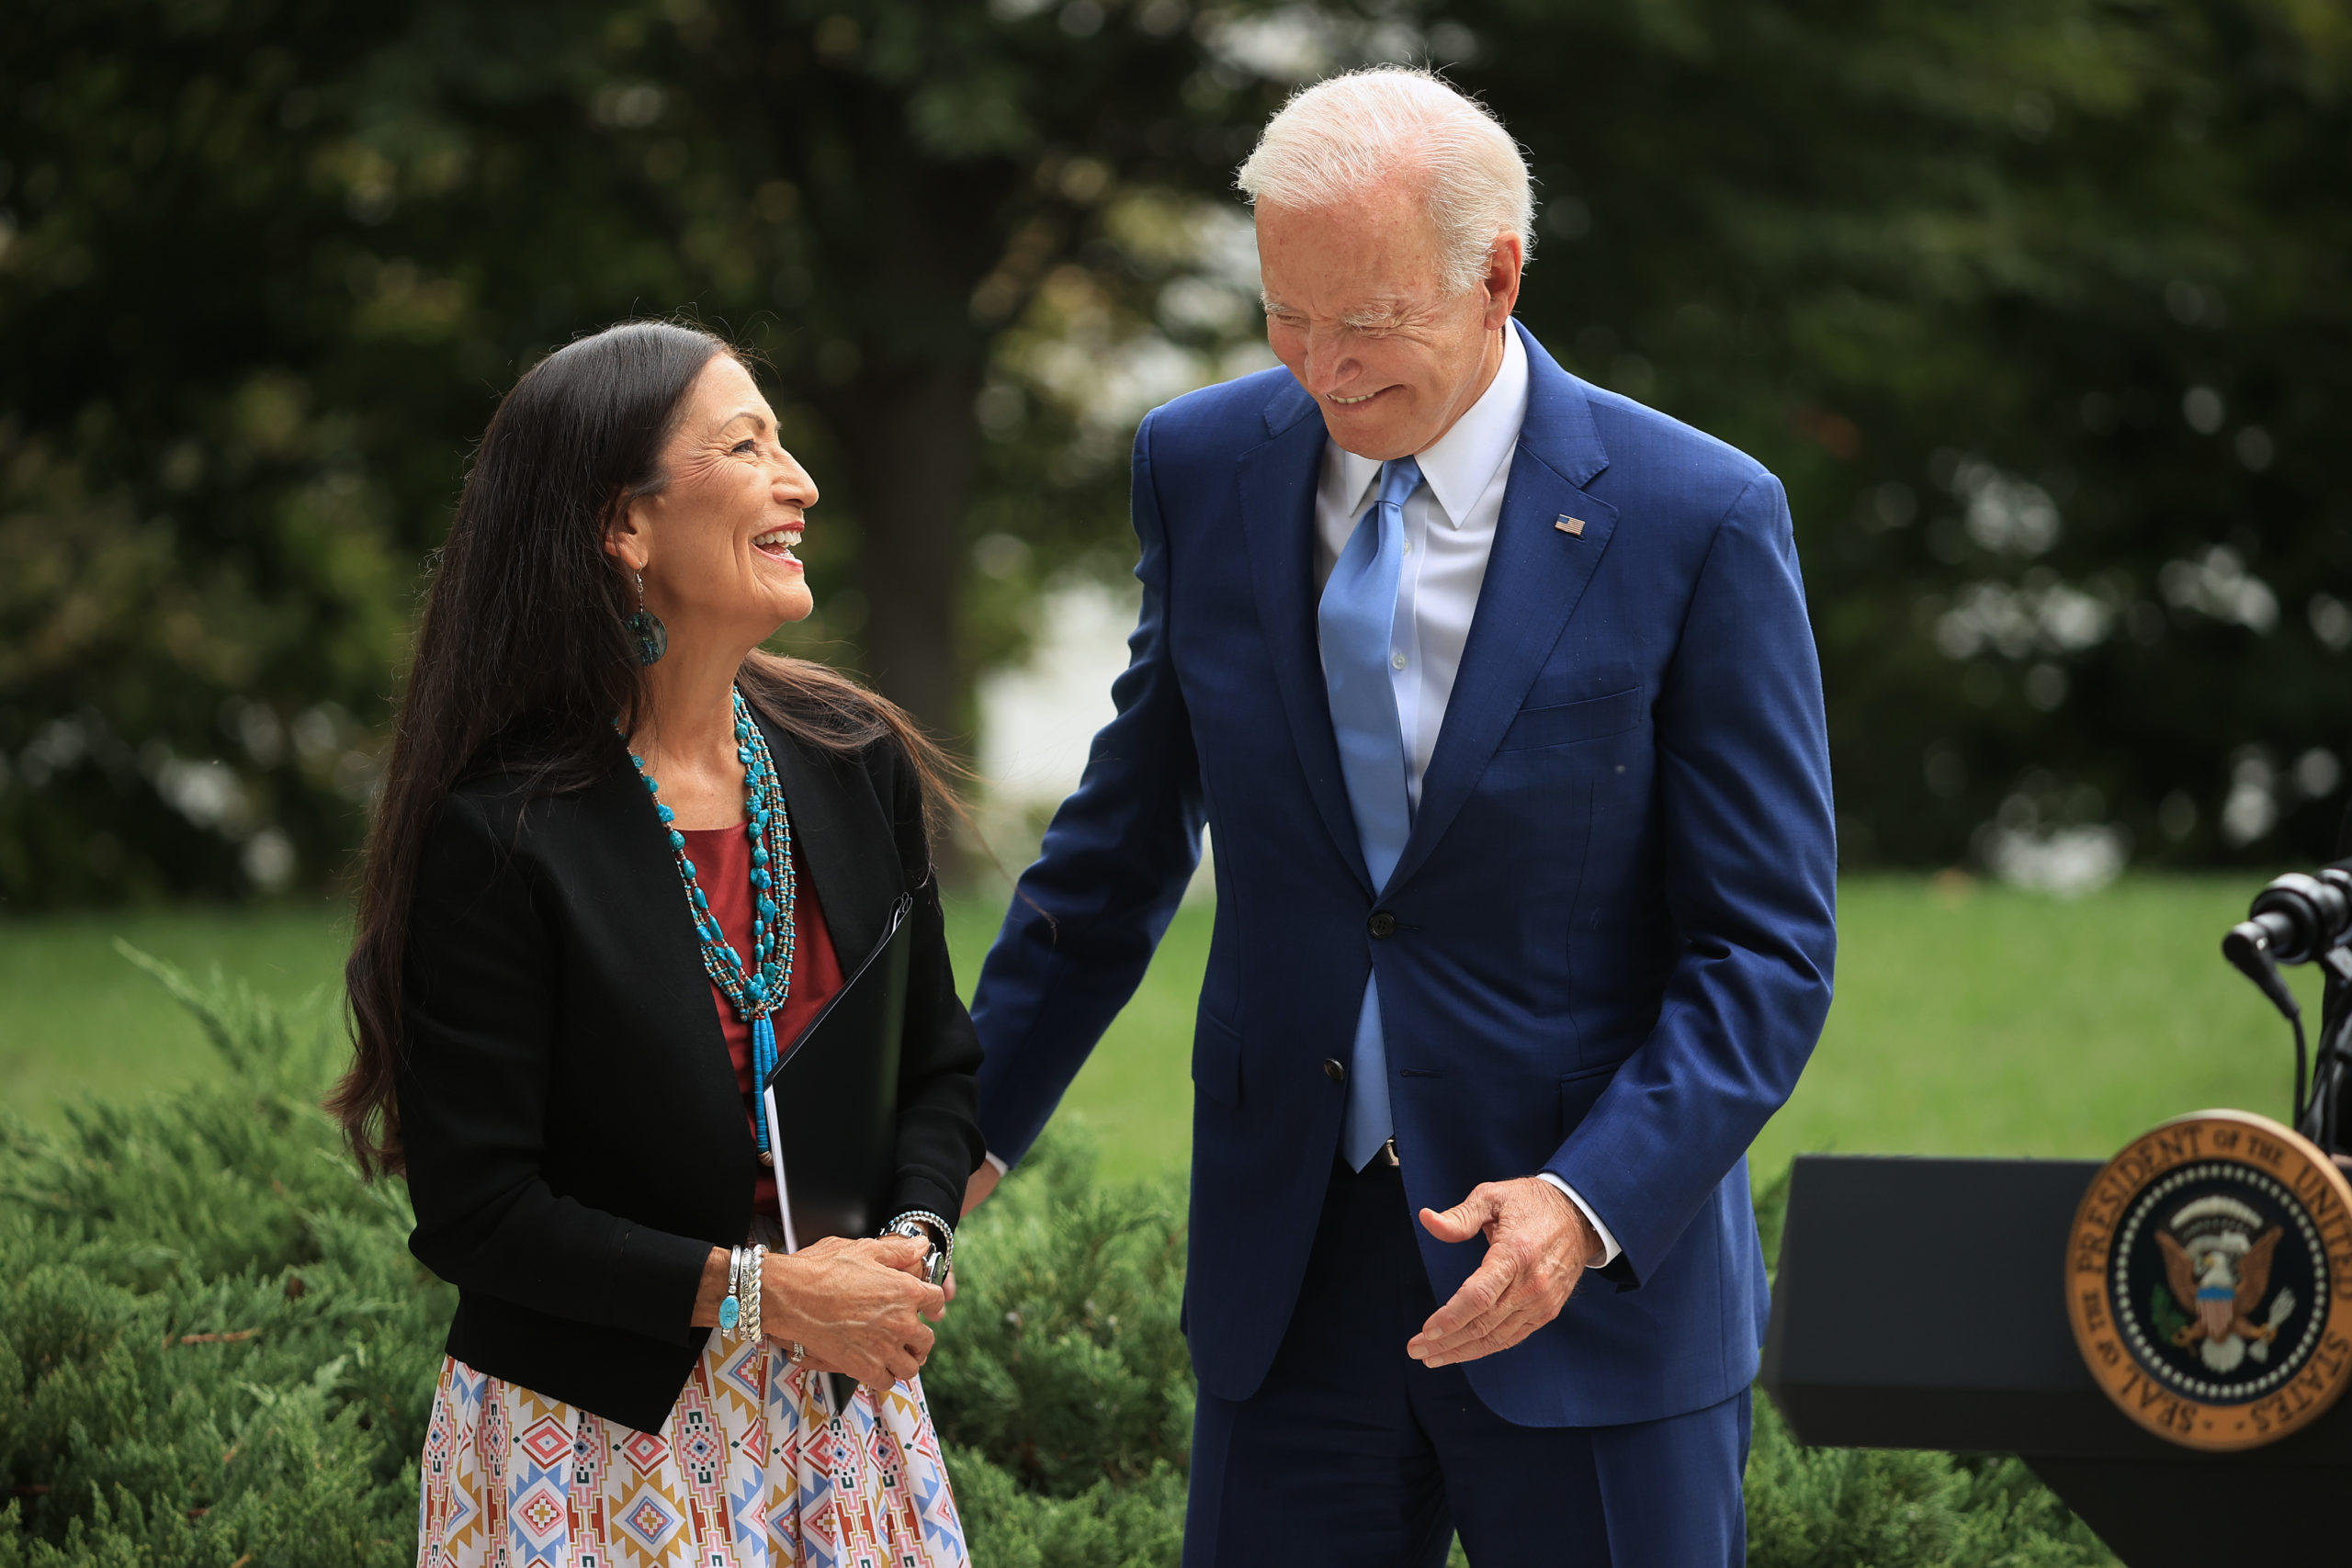 President Joe Biden and Secretary of the Interior Deb Haaland laugh during a ceremony at the White House on Oct. 8. (Chip Somodevilla/Getty Images)